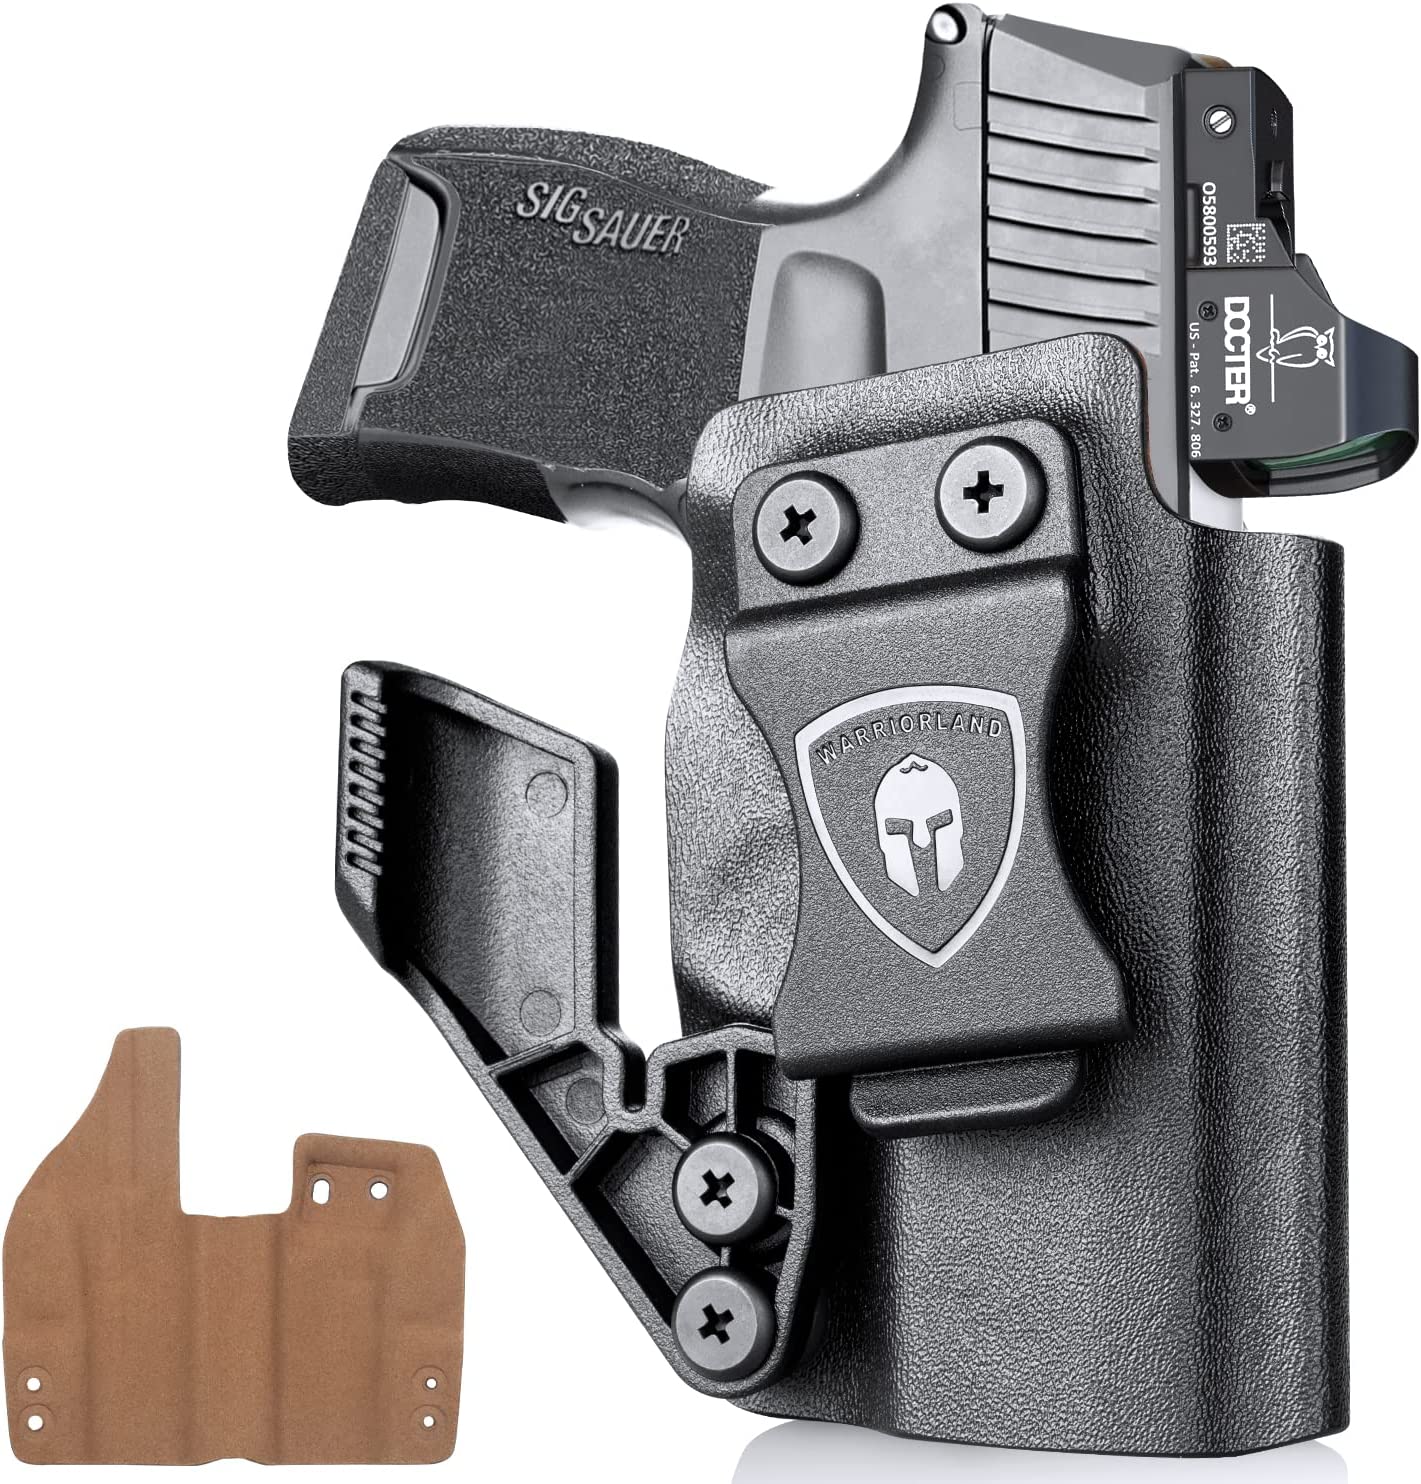 Sig Sauer P365 Holster - Made in U.S.A. - Lifetime Warranty